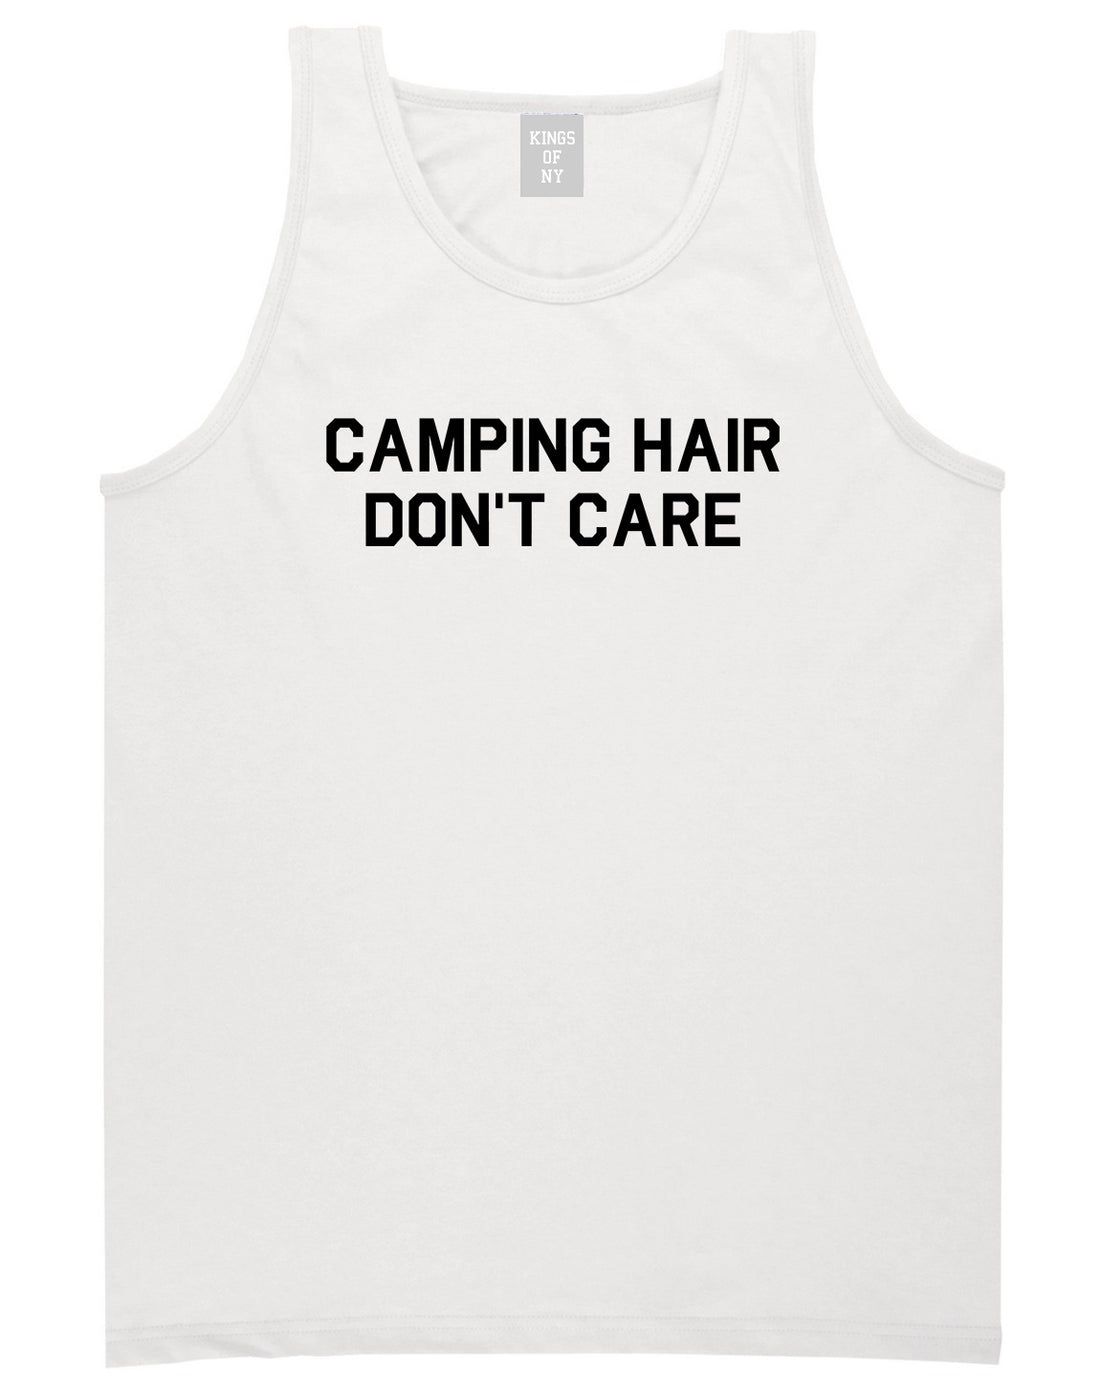 Camping Hair Dont Care White Tank Top Shirt by Kings Of NY